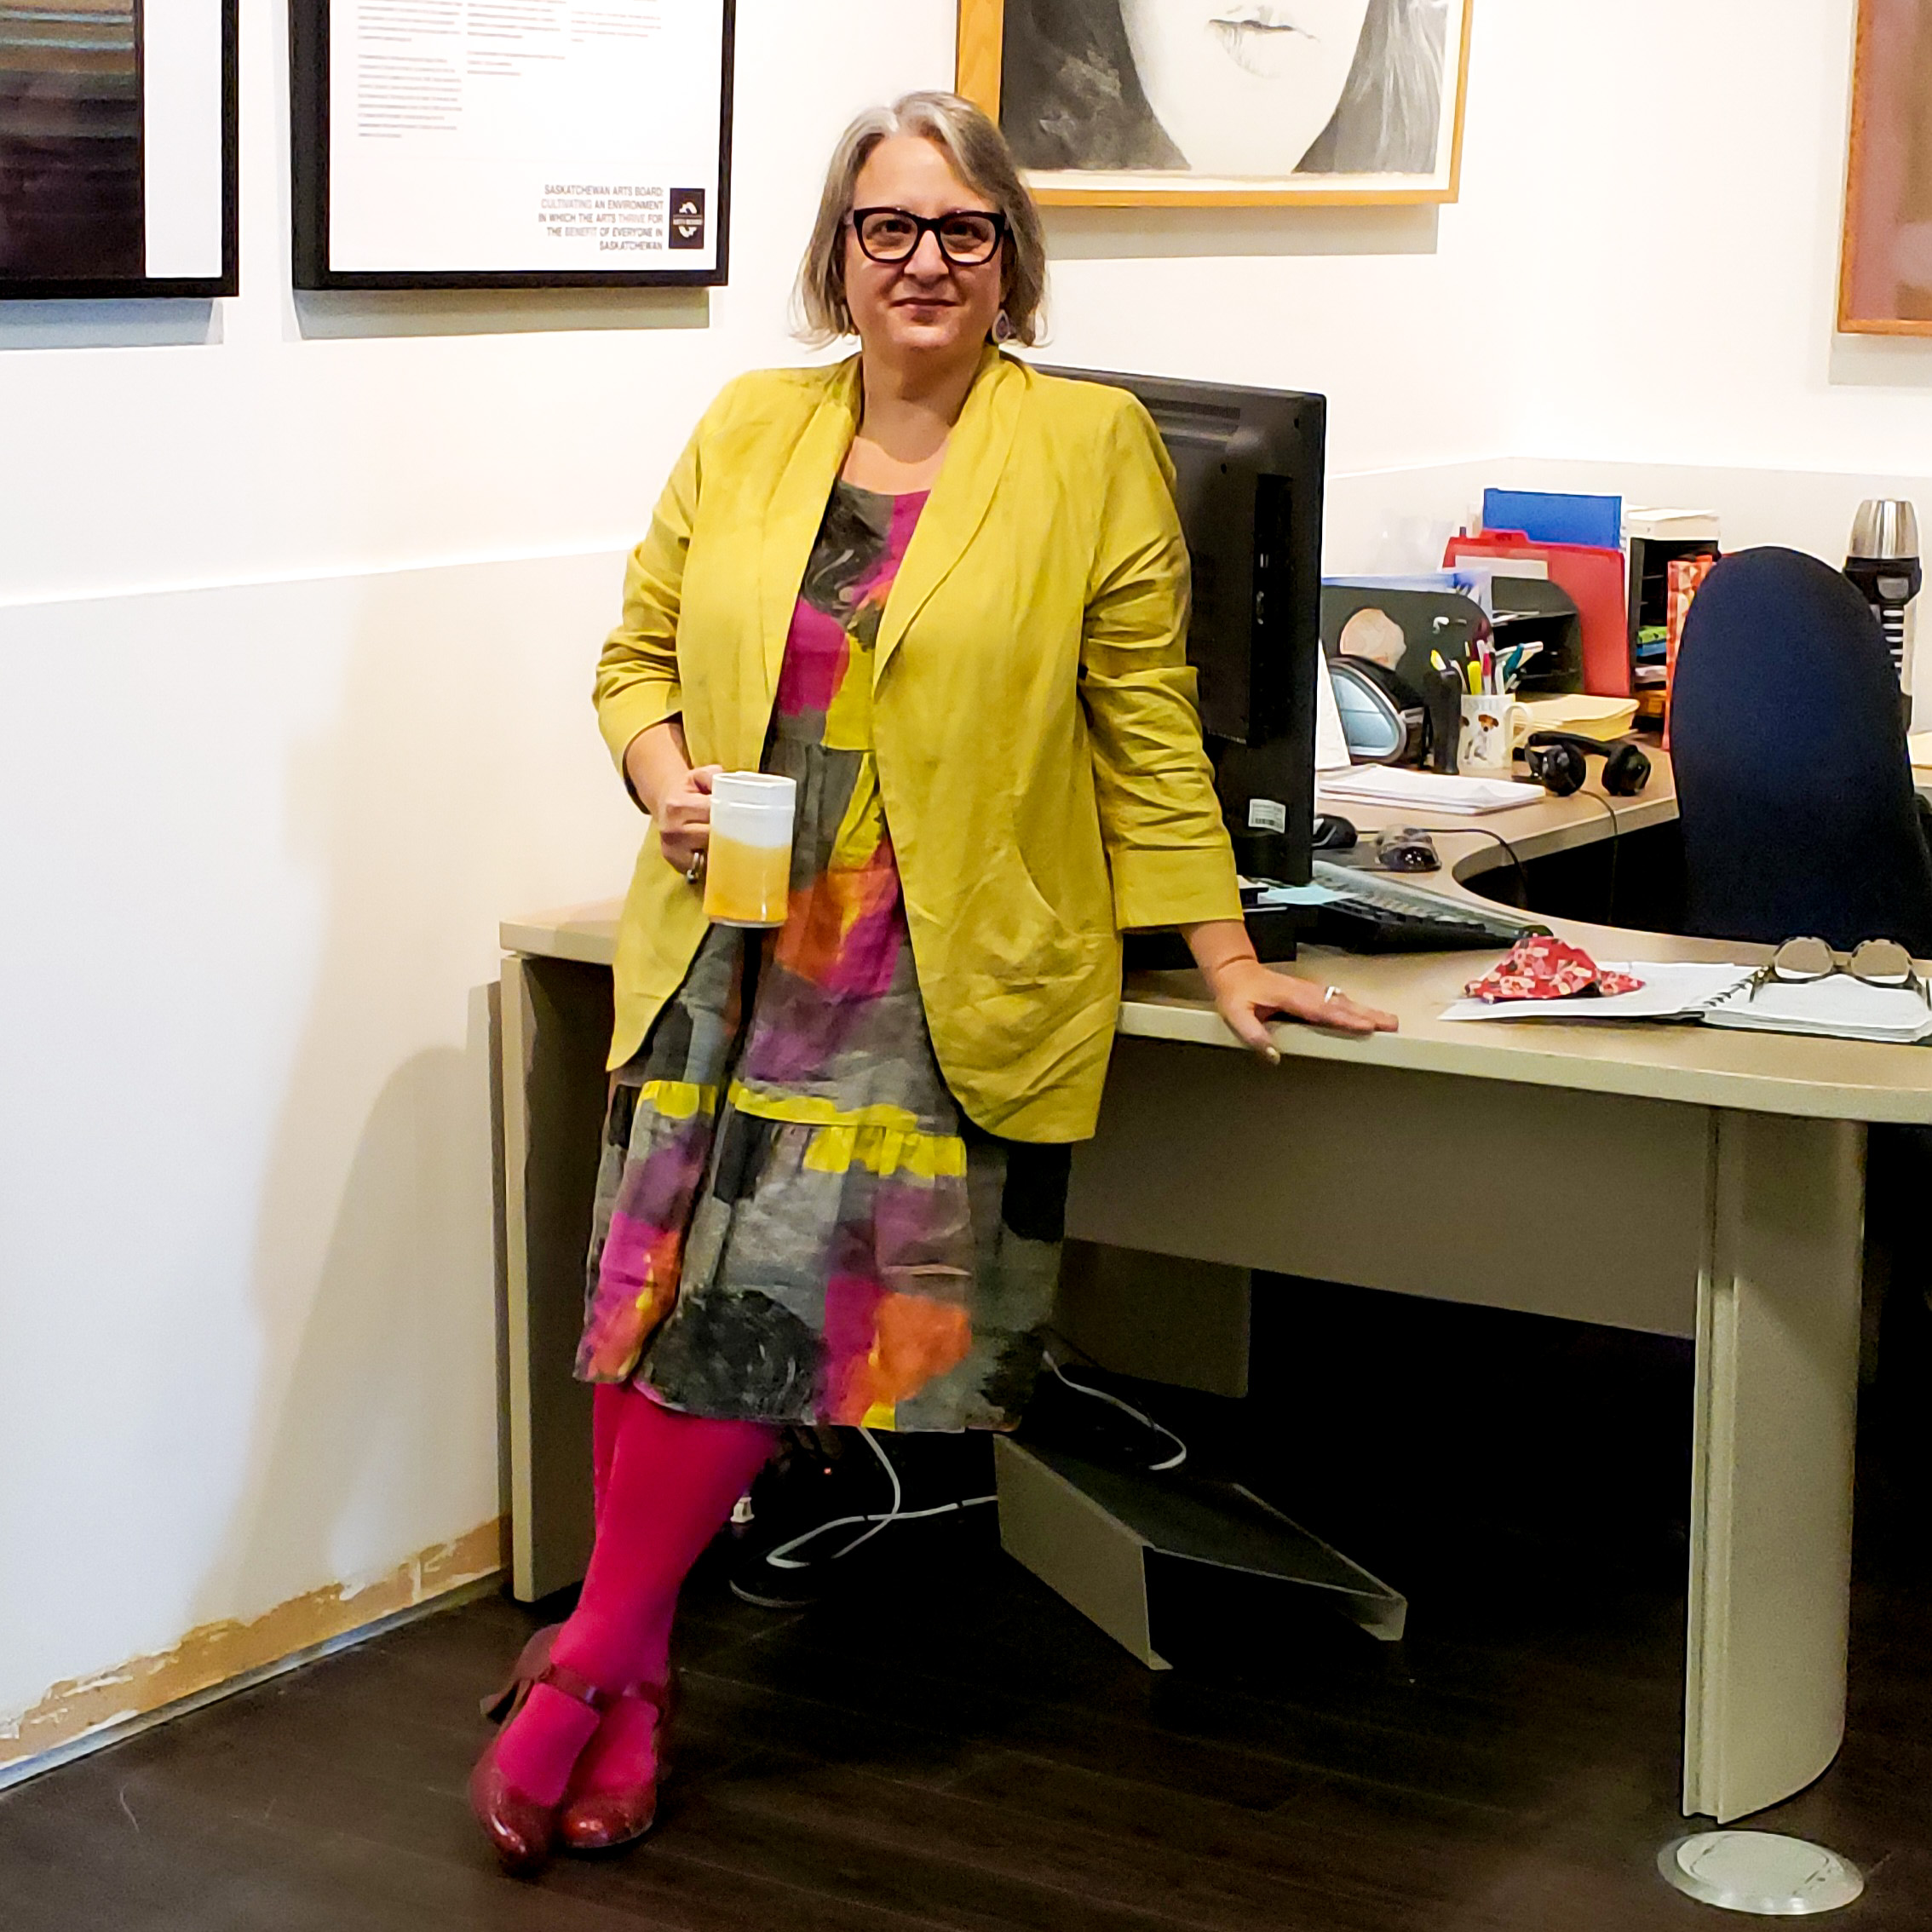 Belinda Harrow, SK Arts Permanent Collection Consultant - Older woman leaning on a desk with crossed legs holding a coffee mug. She has grey hair, wearing glasses and smiling. She is wearing a mustard yellow jacket, a colourful dress, red stockings and strapped shoes.